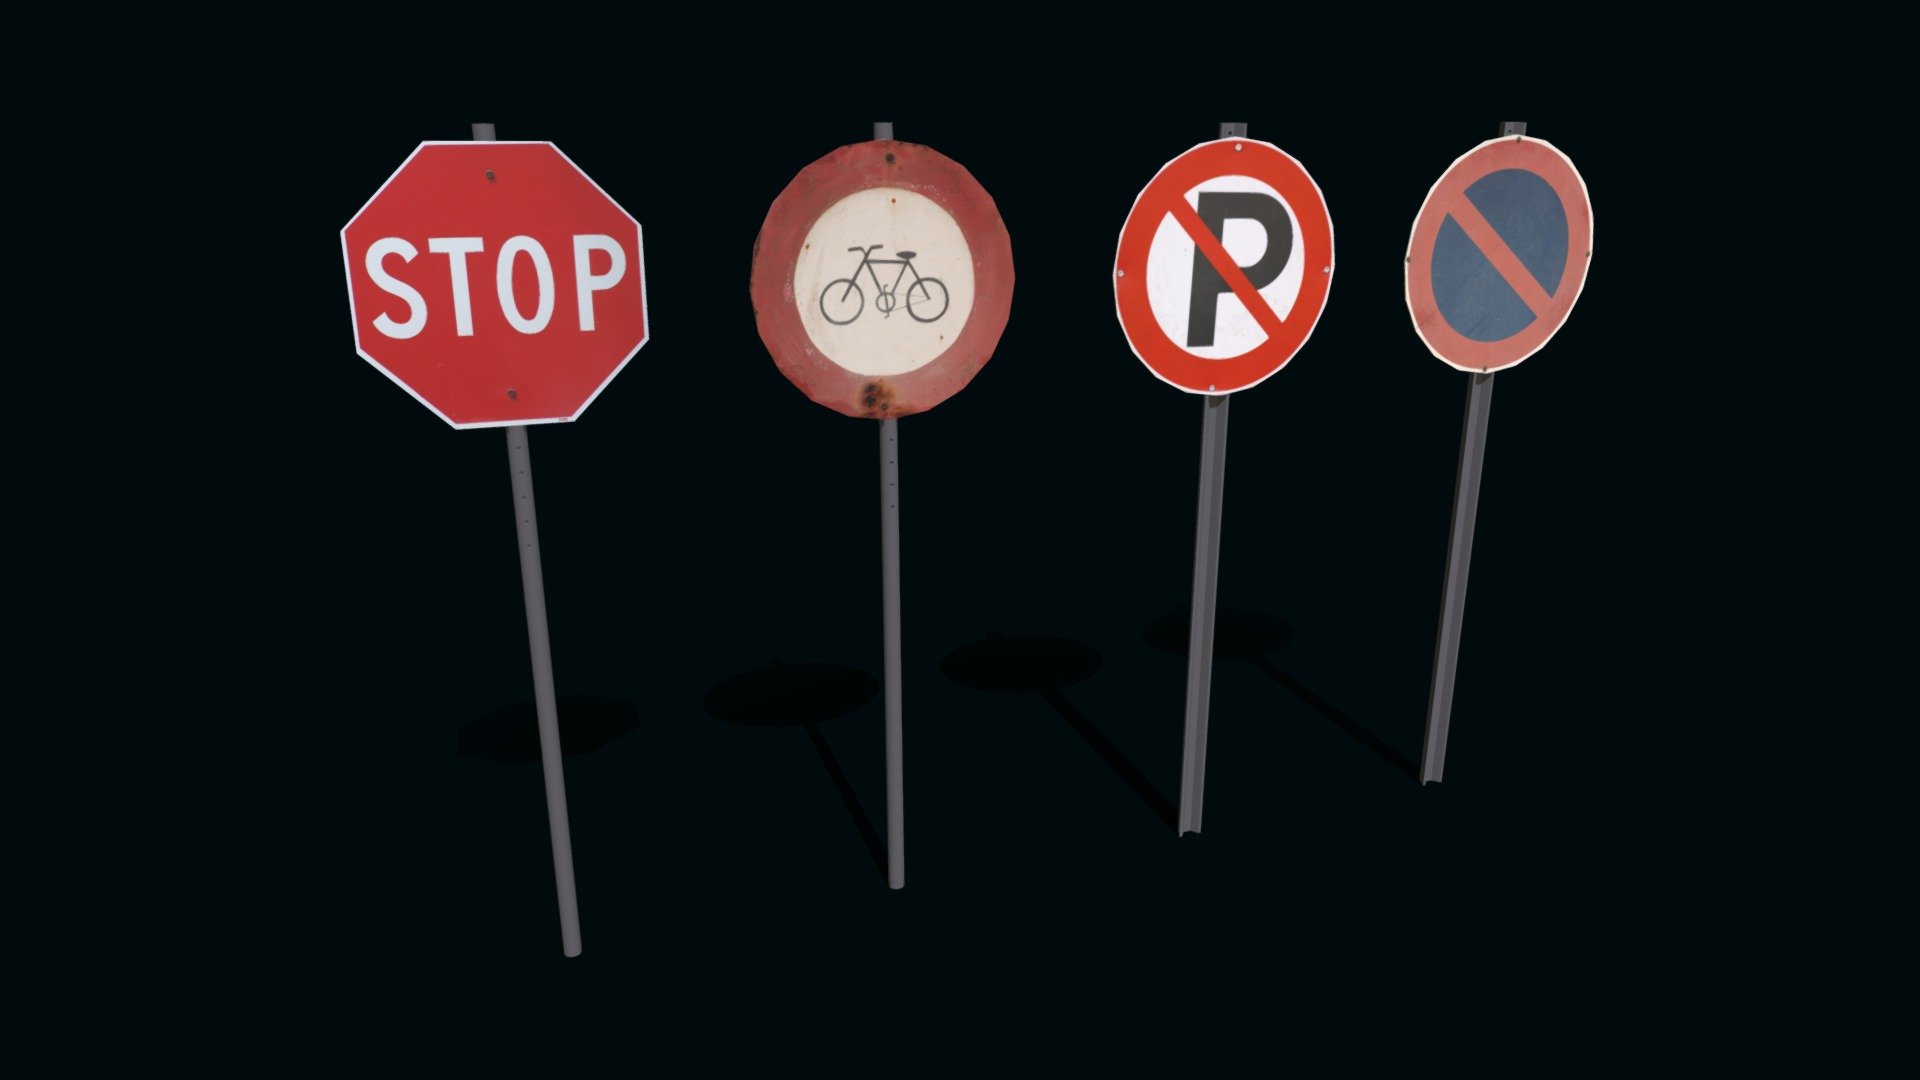 Few road signs, uv mapped and ready to use. Textures can be changed as wished 3d model